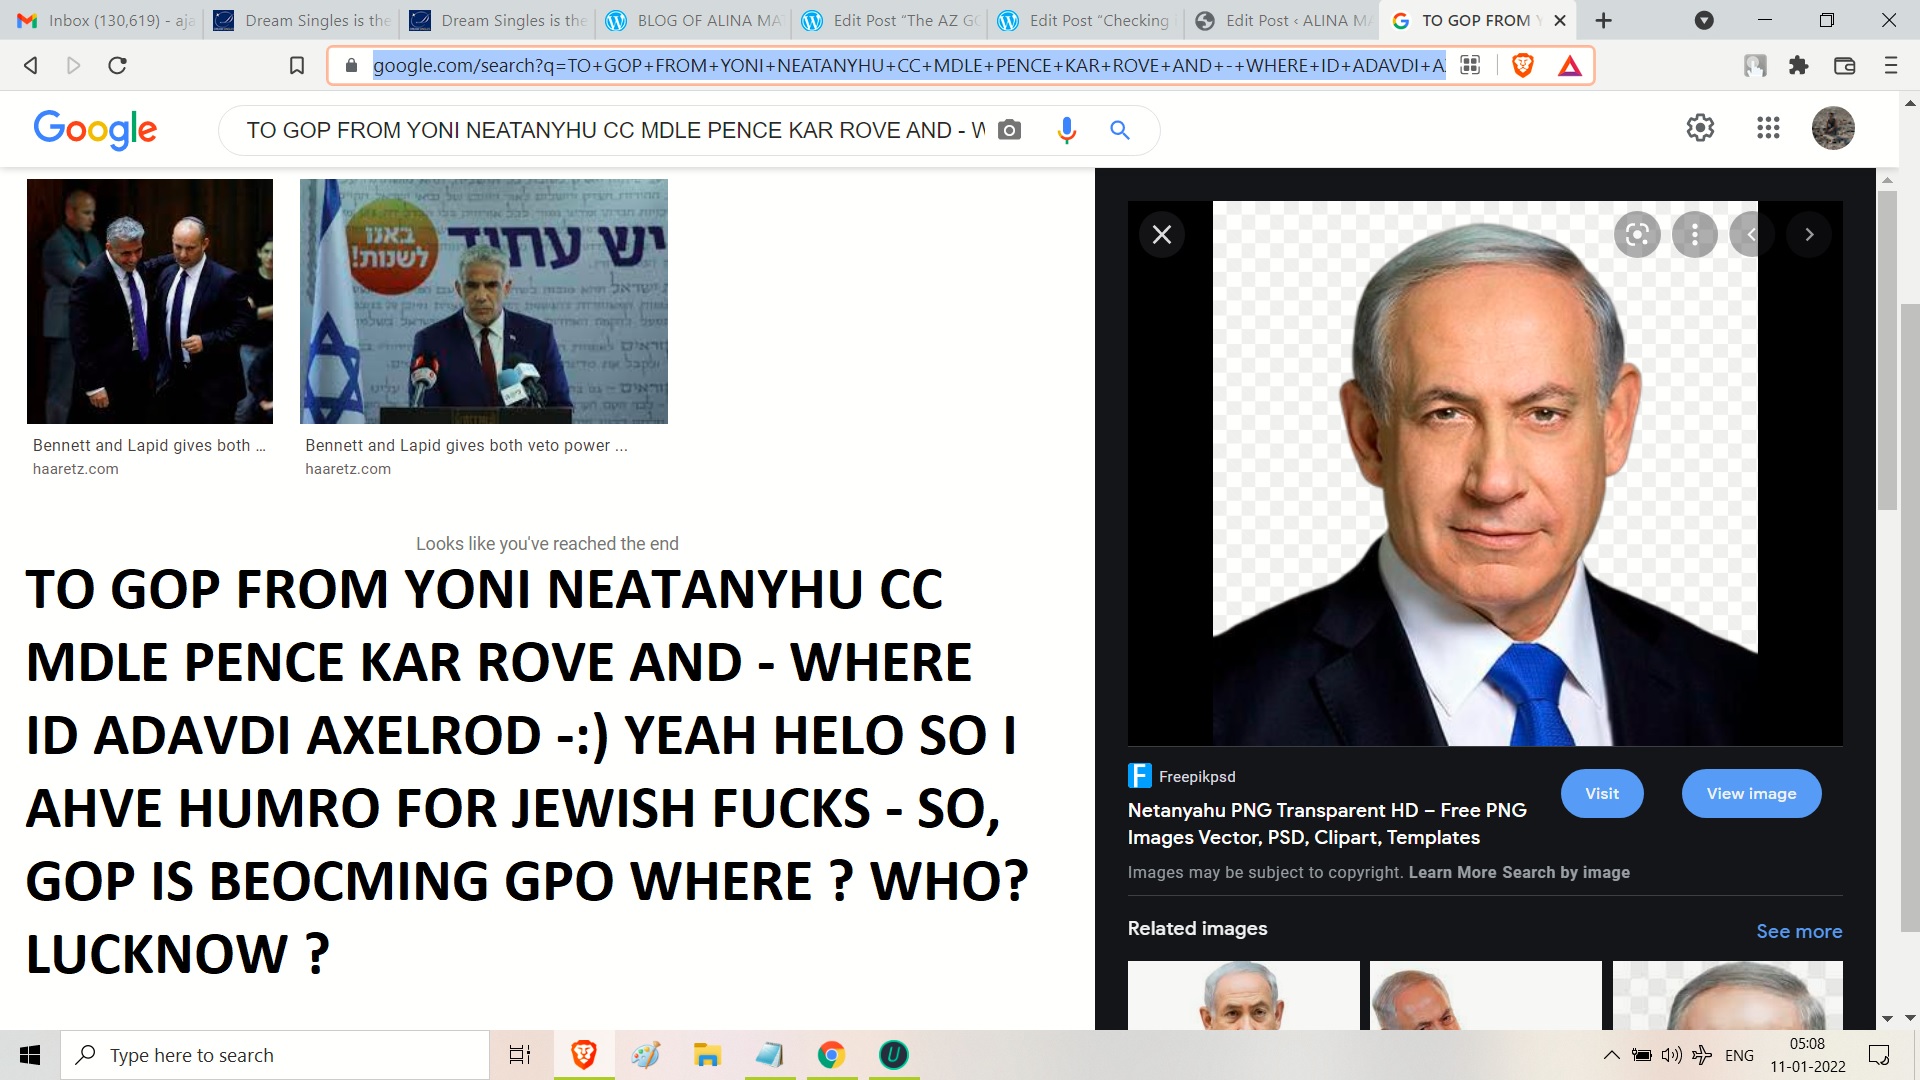 TO GOP FROM YONI NEATANYHU CC MDLE PENCE KAR ROVE AND - WHERE ID ADAVDI AXELROD YEAH HELO SO I AHVE HUMRO FOR JEWISH FUCKS - SO, GOP IS BEOCMING GPO WHERE WHO LUCKNOW